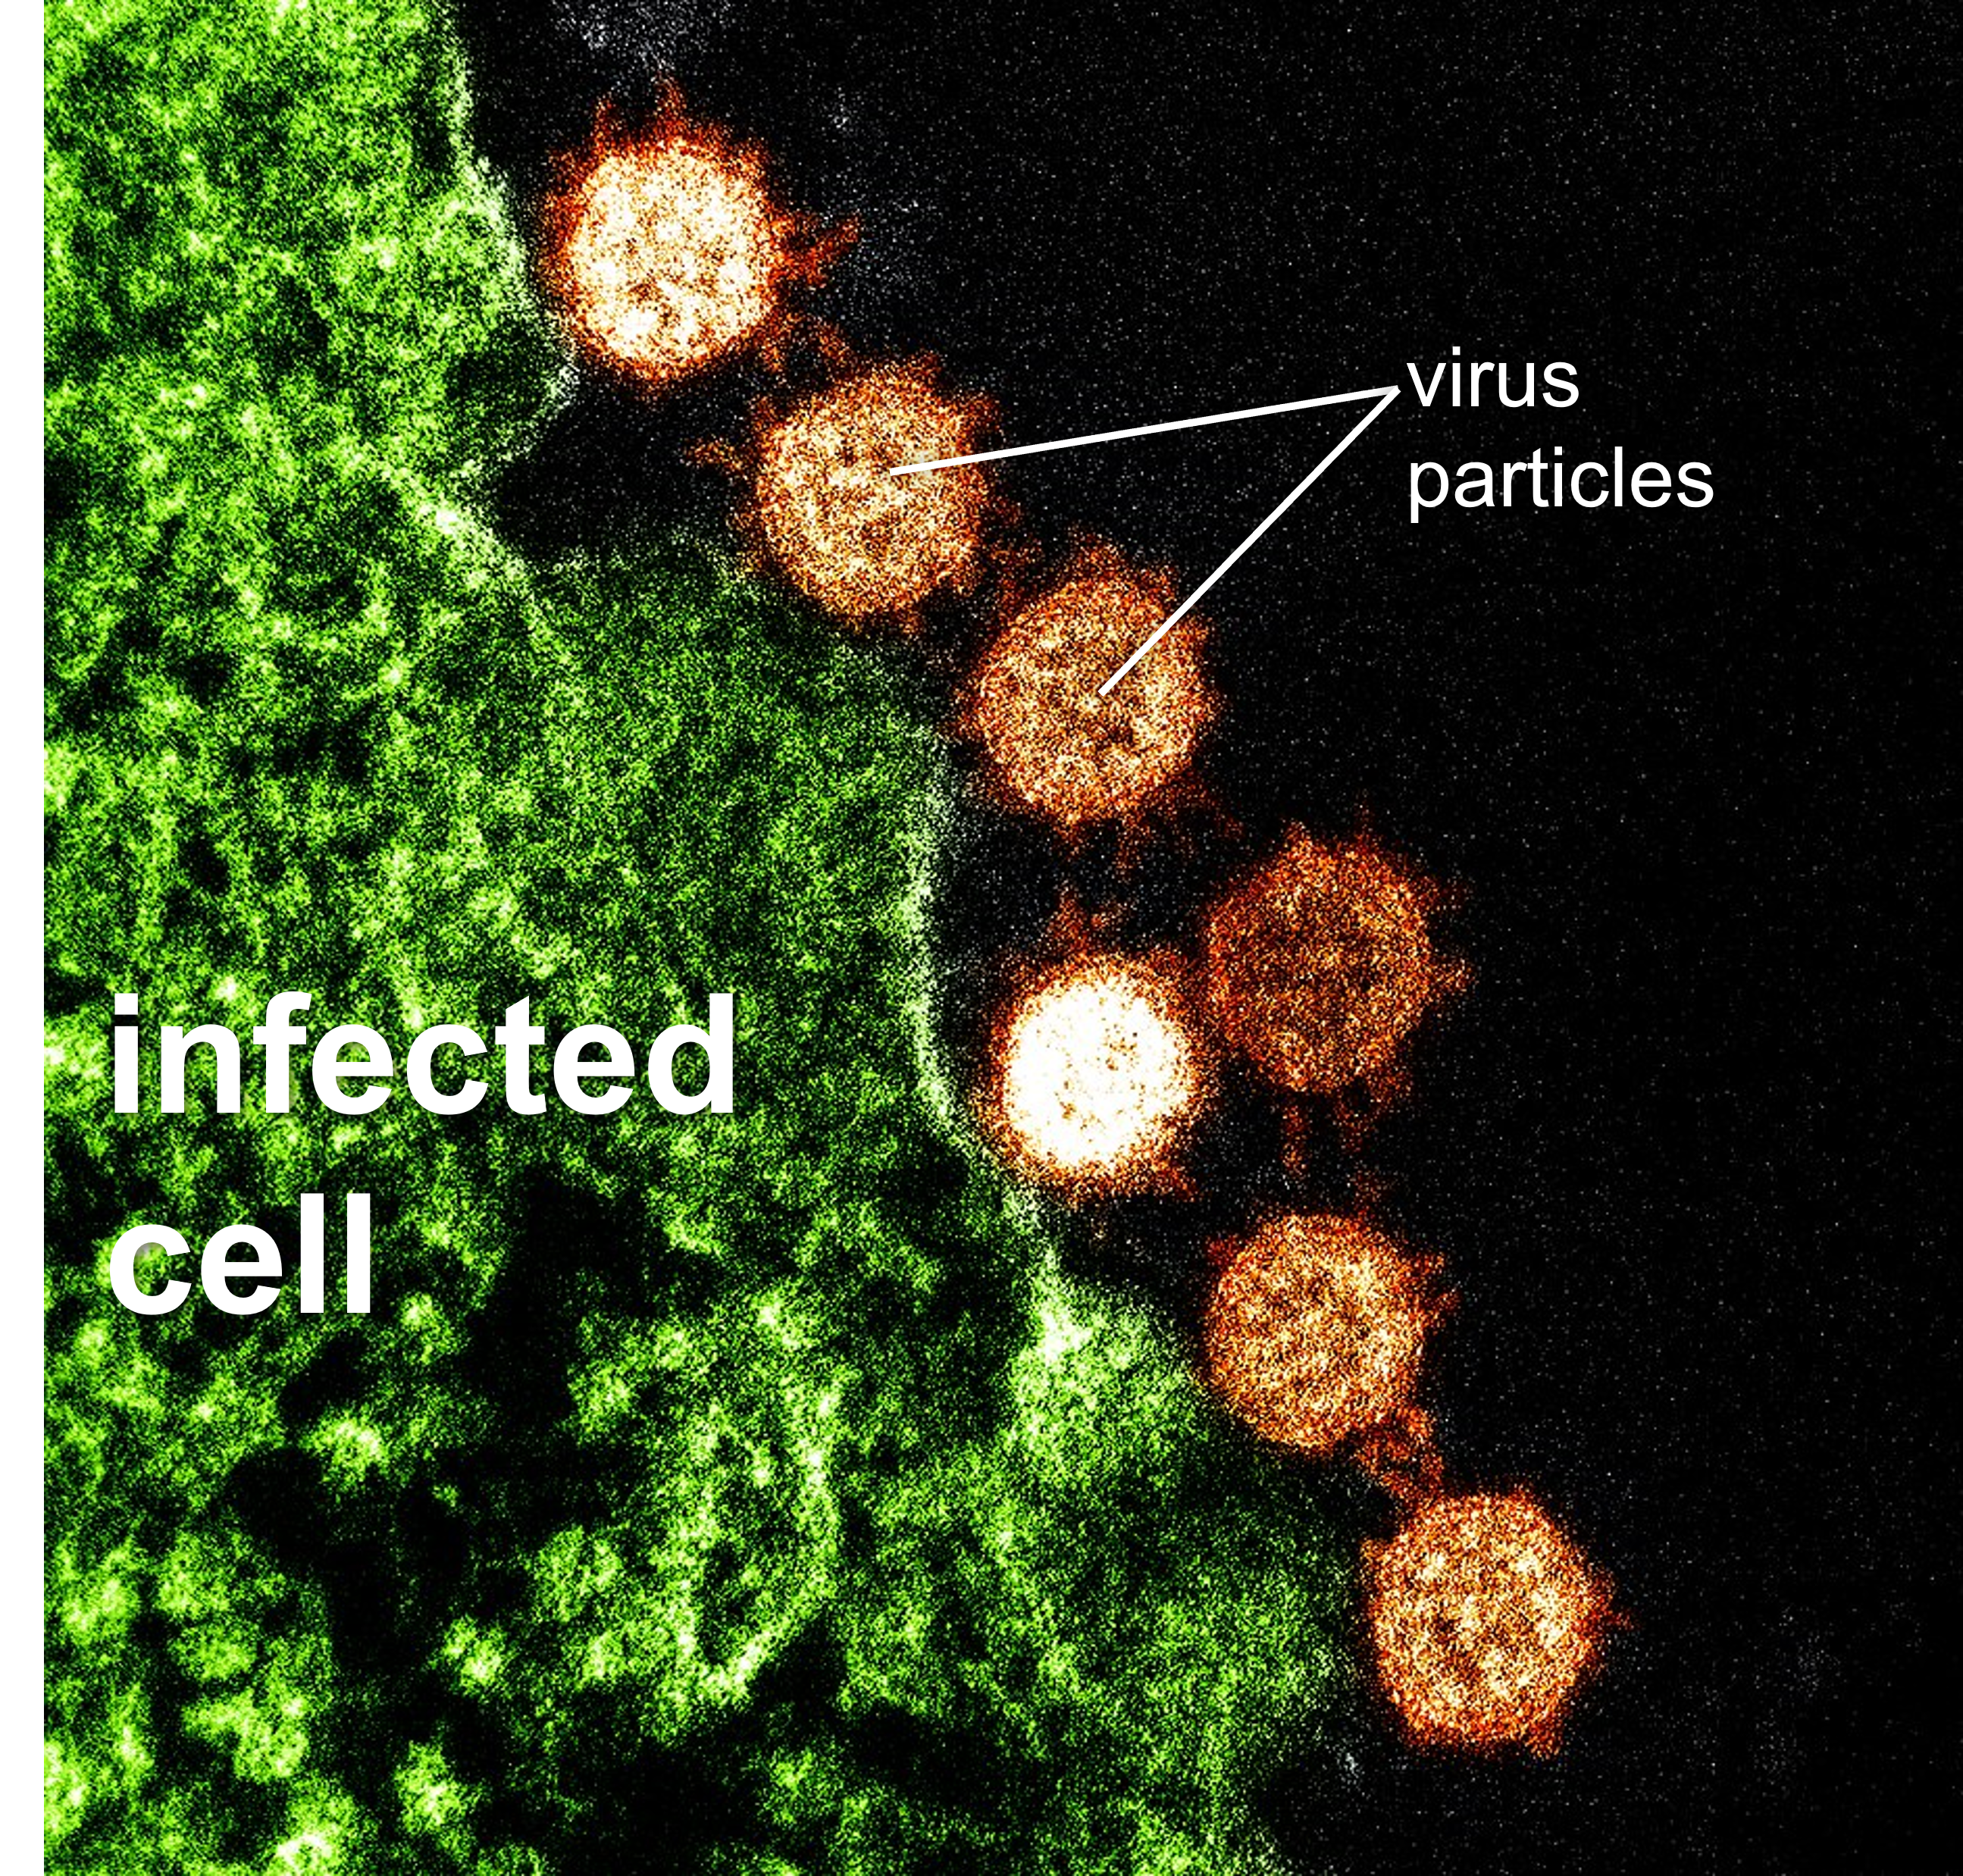 SARS virus particles and infected cell